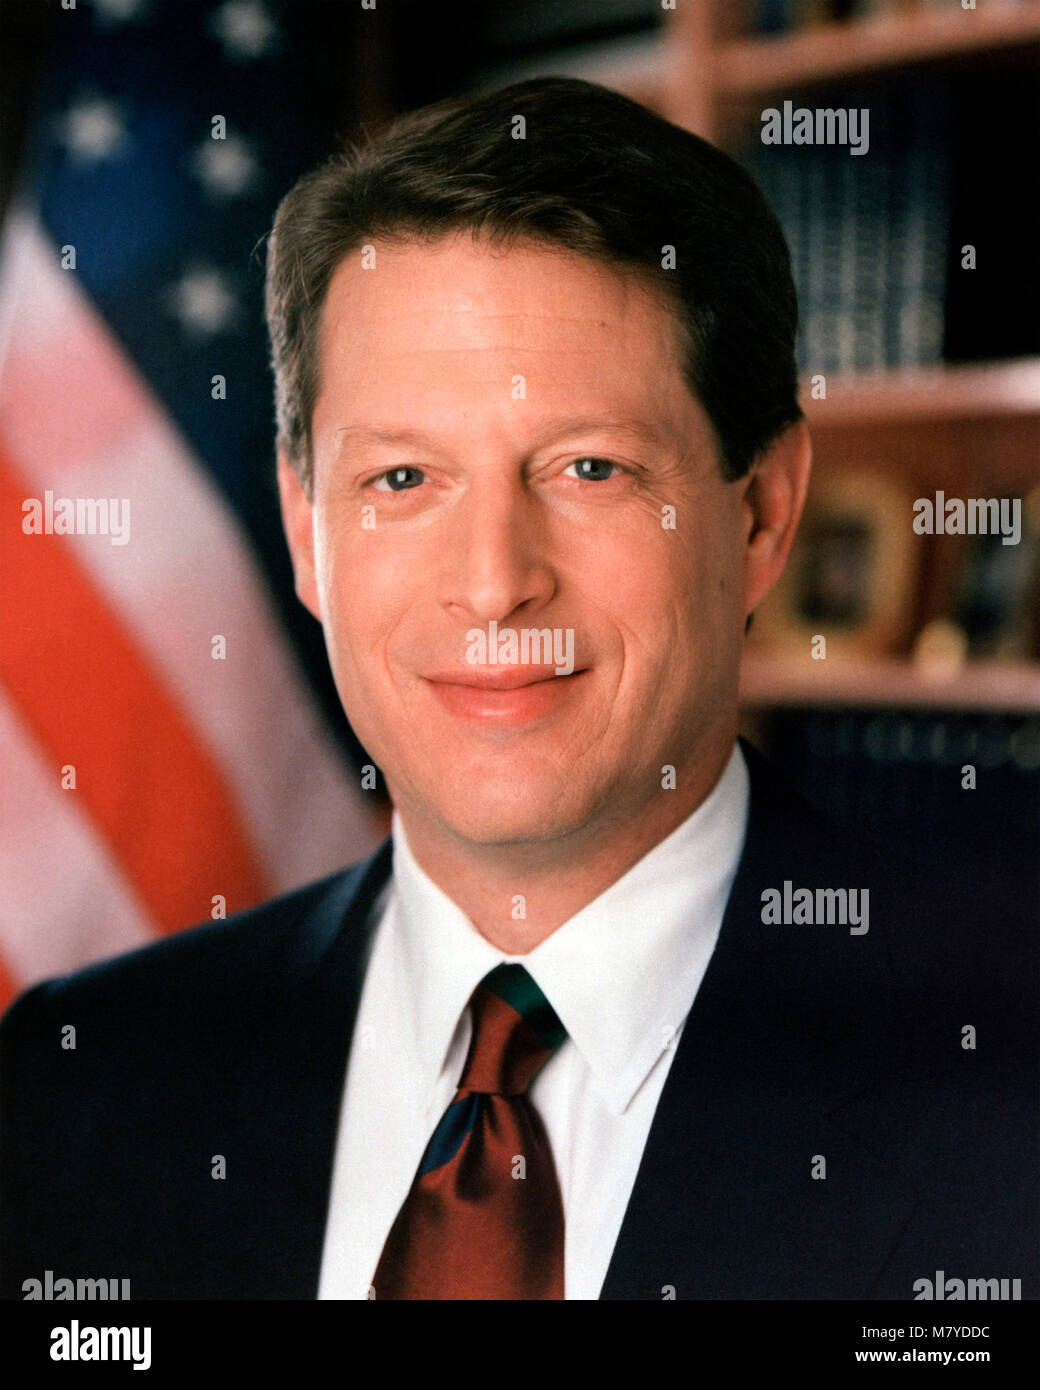 Al Gore (1948 - ). Portrait of Albert Arnold Gore Jr, who was vice-President of the United States under Bill Clinton from 1993-2001. Official government portrait, 1994. Stock Photo